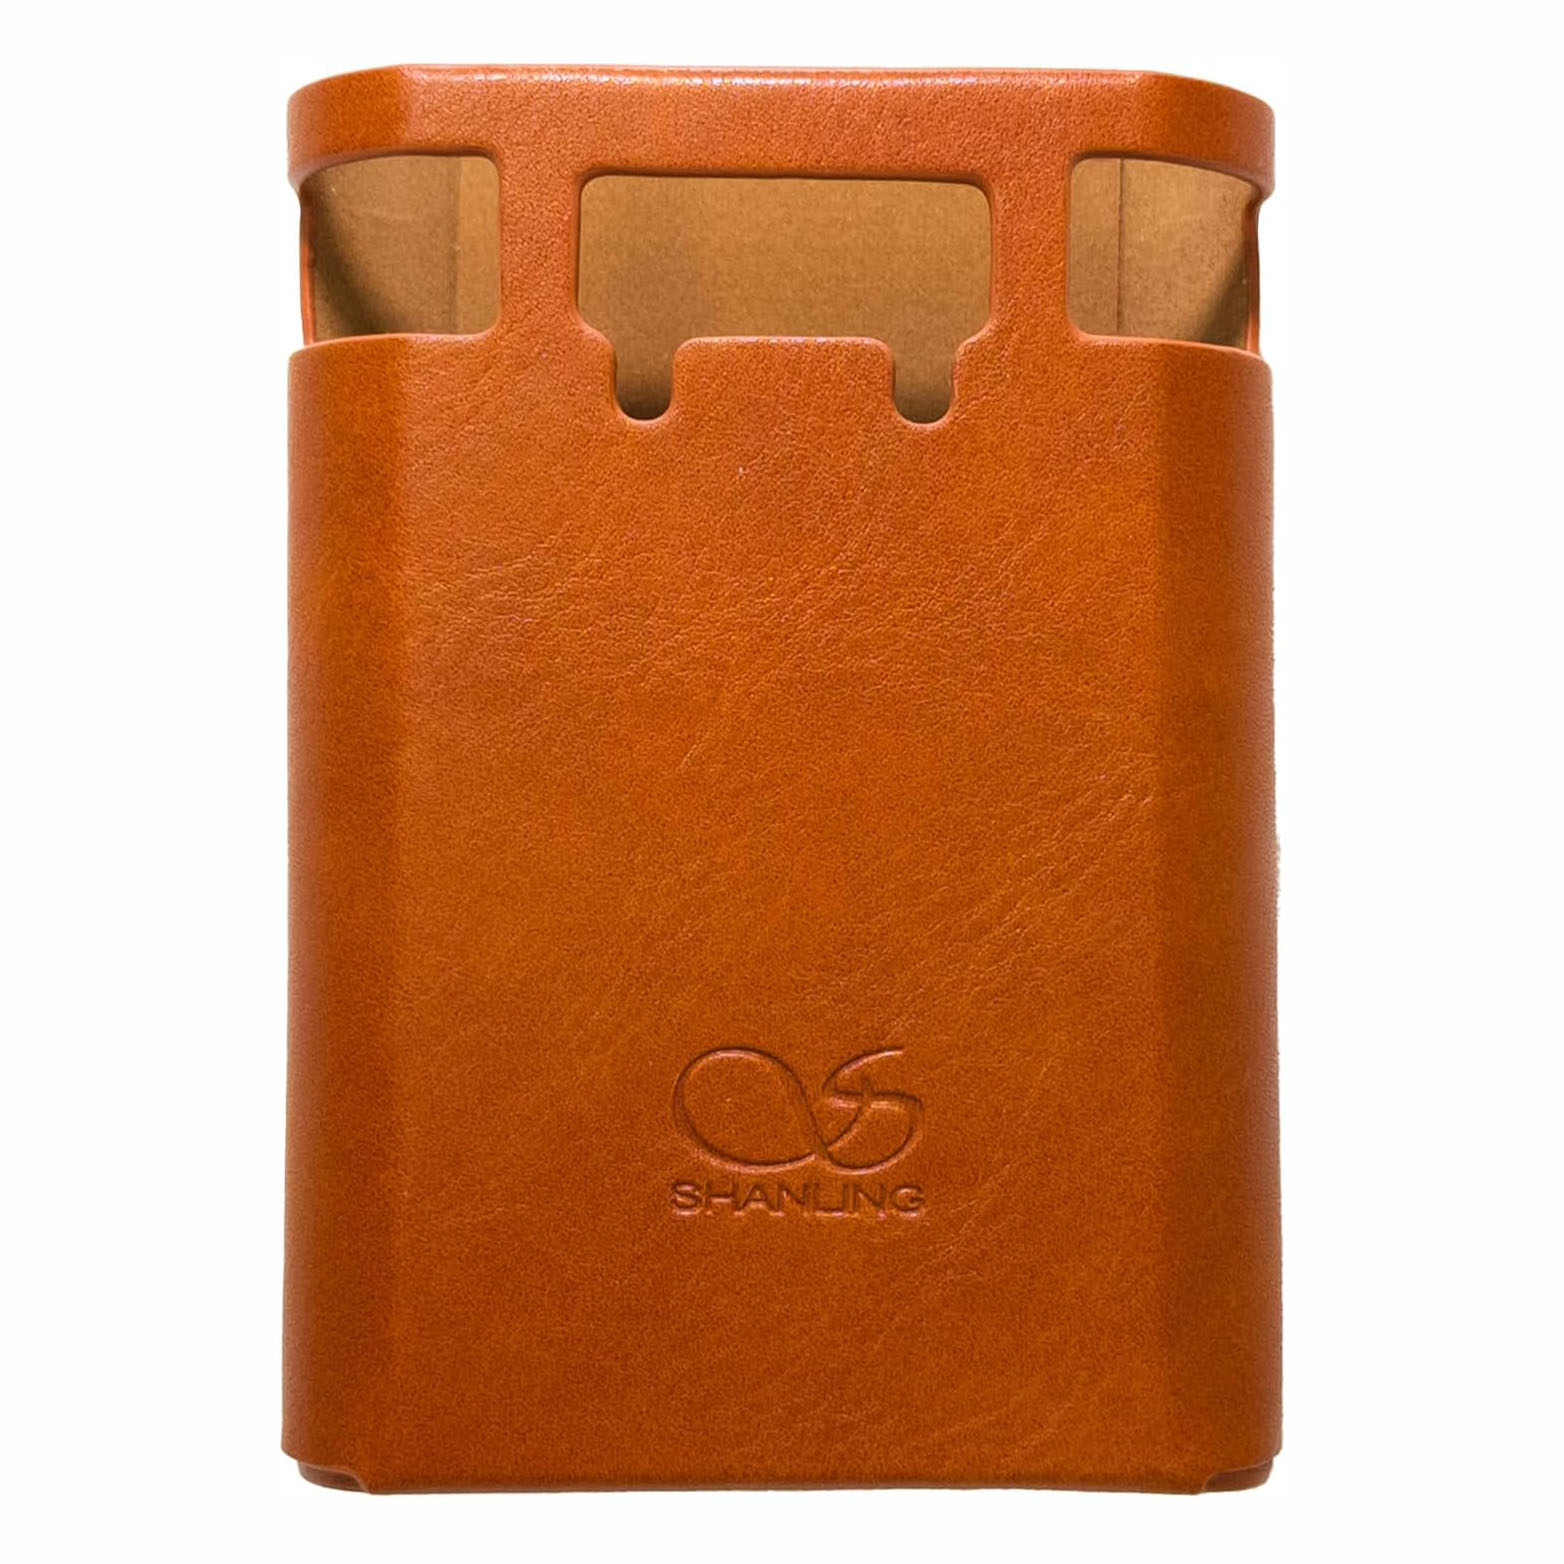 Shanling H2 Case Brown